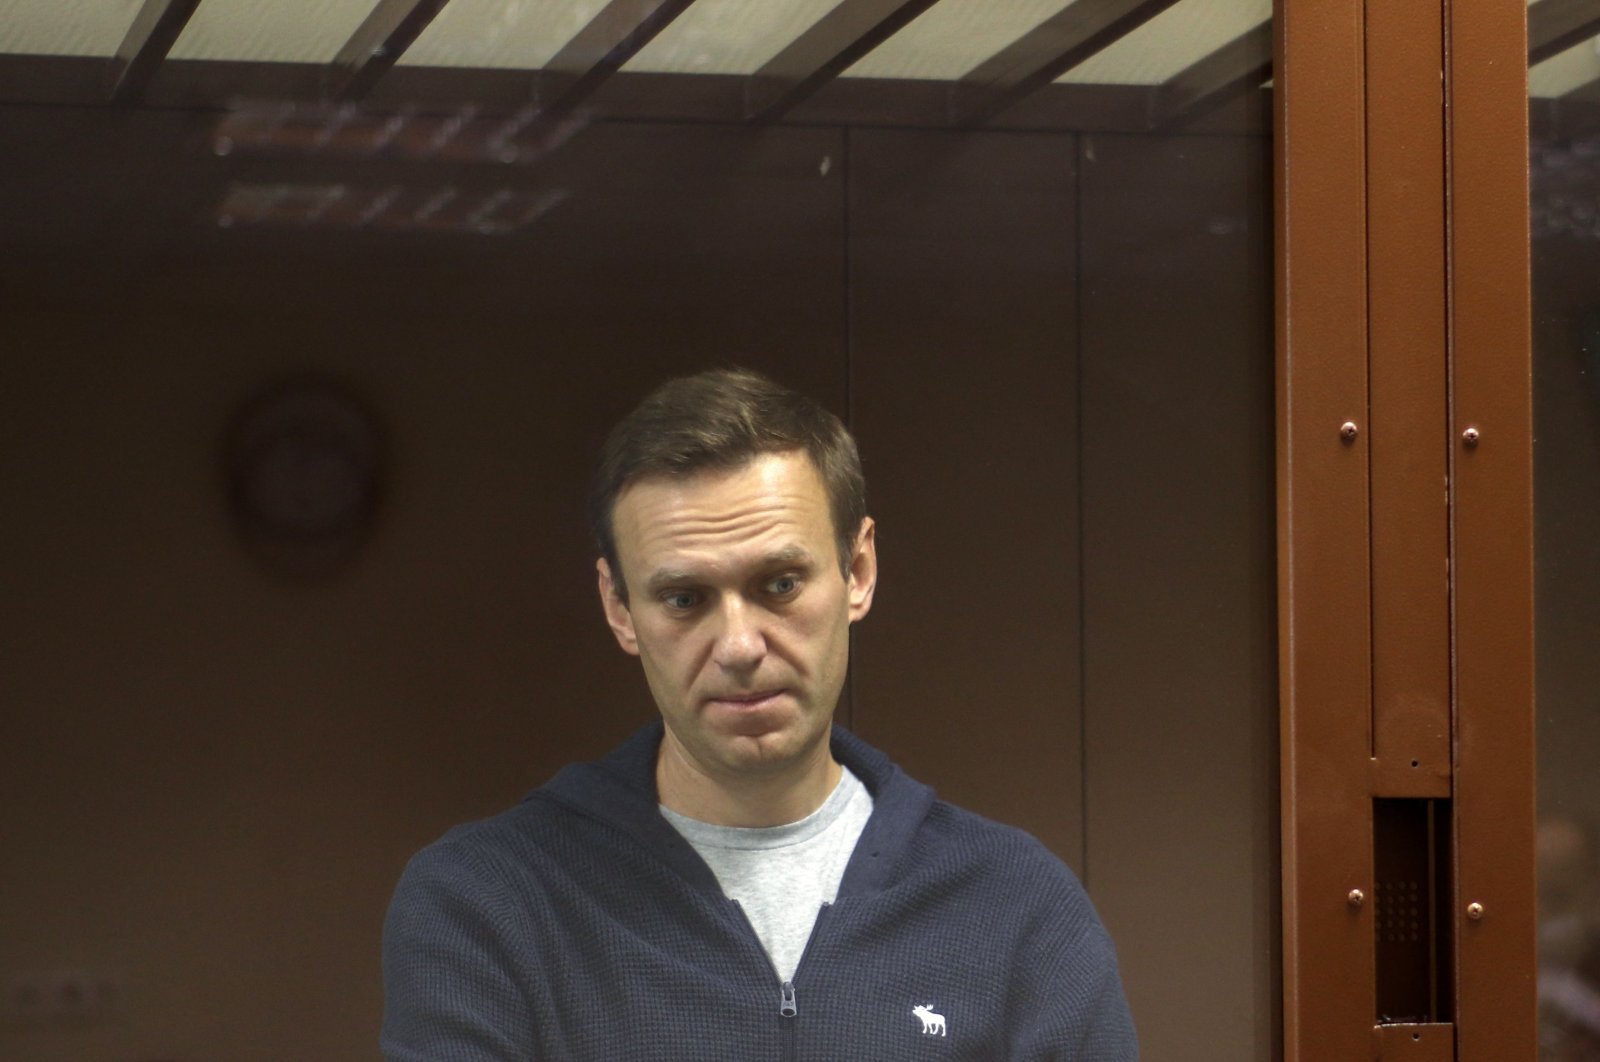 Russian opposition leader Alexei Navalny, standing inside a glass cell during a court hearing in Moscow, Russia, on Feb. 12, 2021. (AFP)